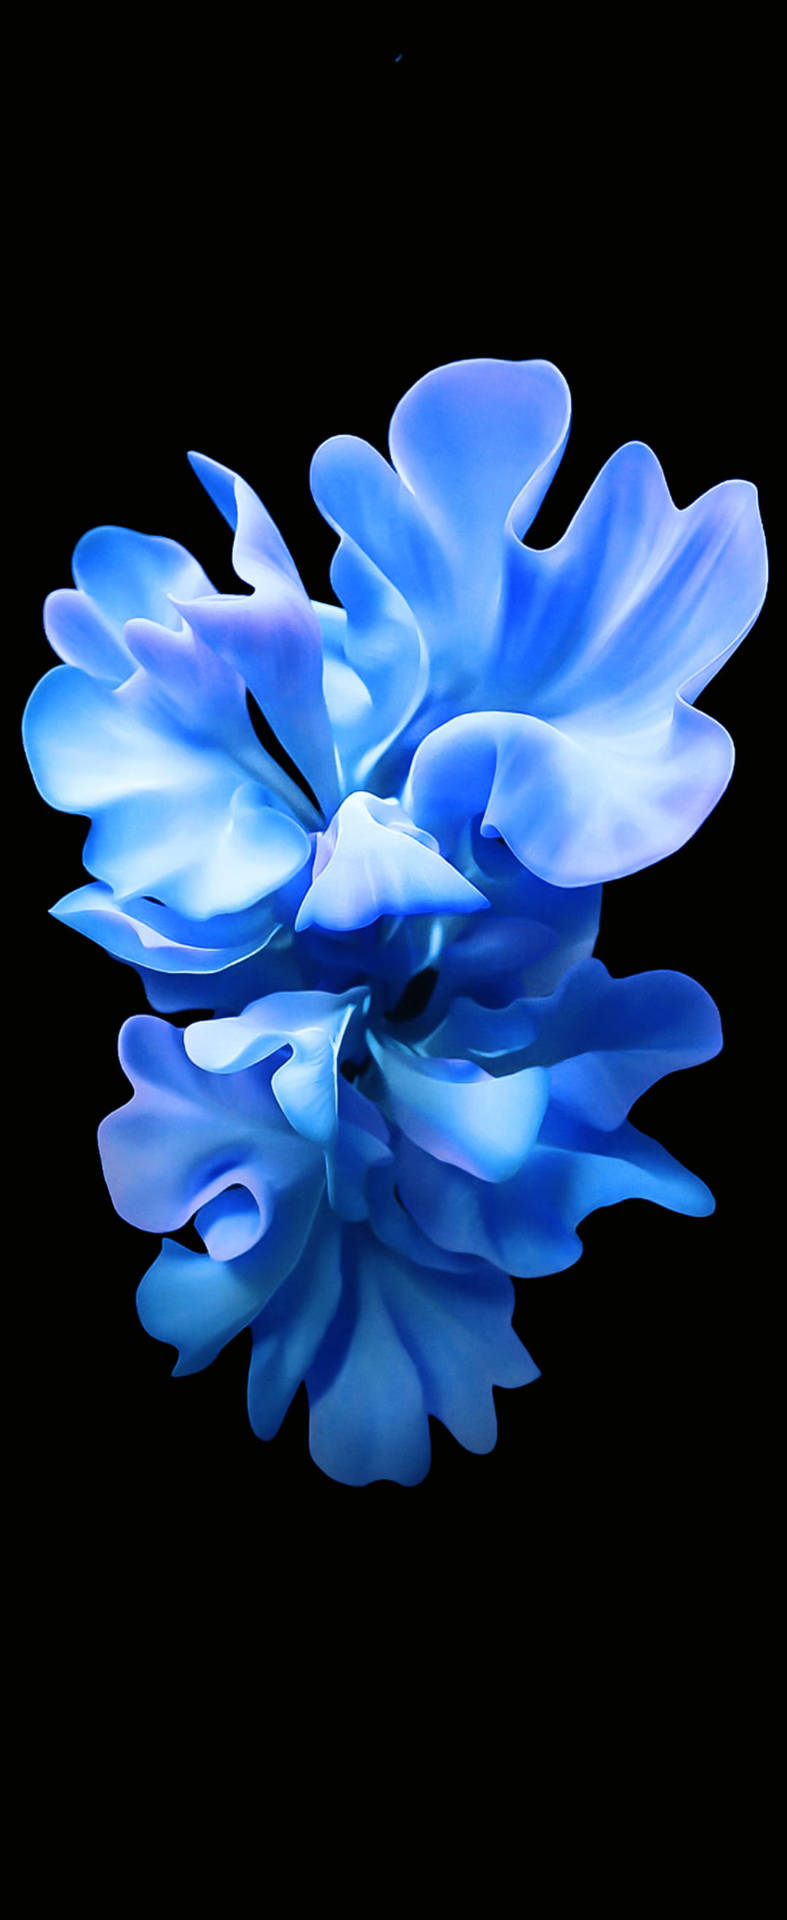 Crystal Blue Flower For Samsung S20 Fe Picture